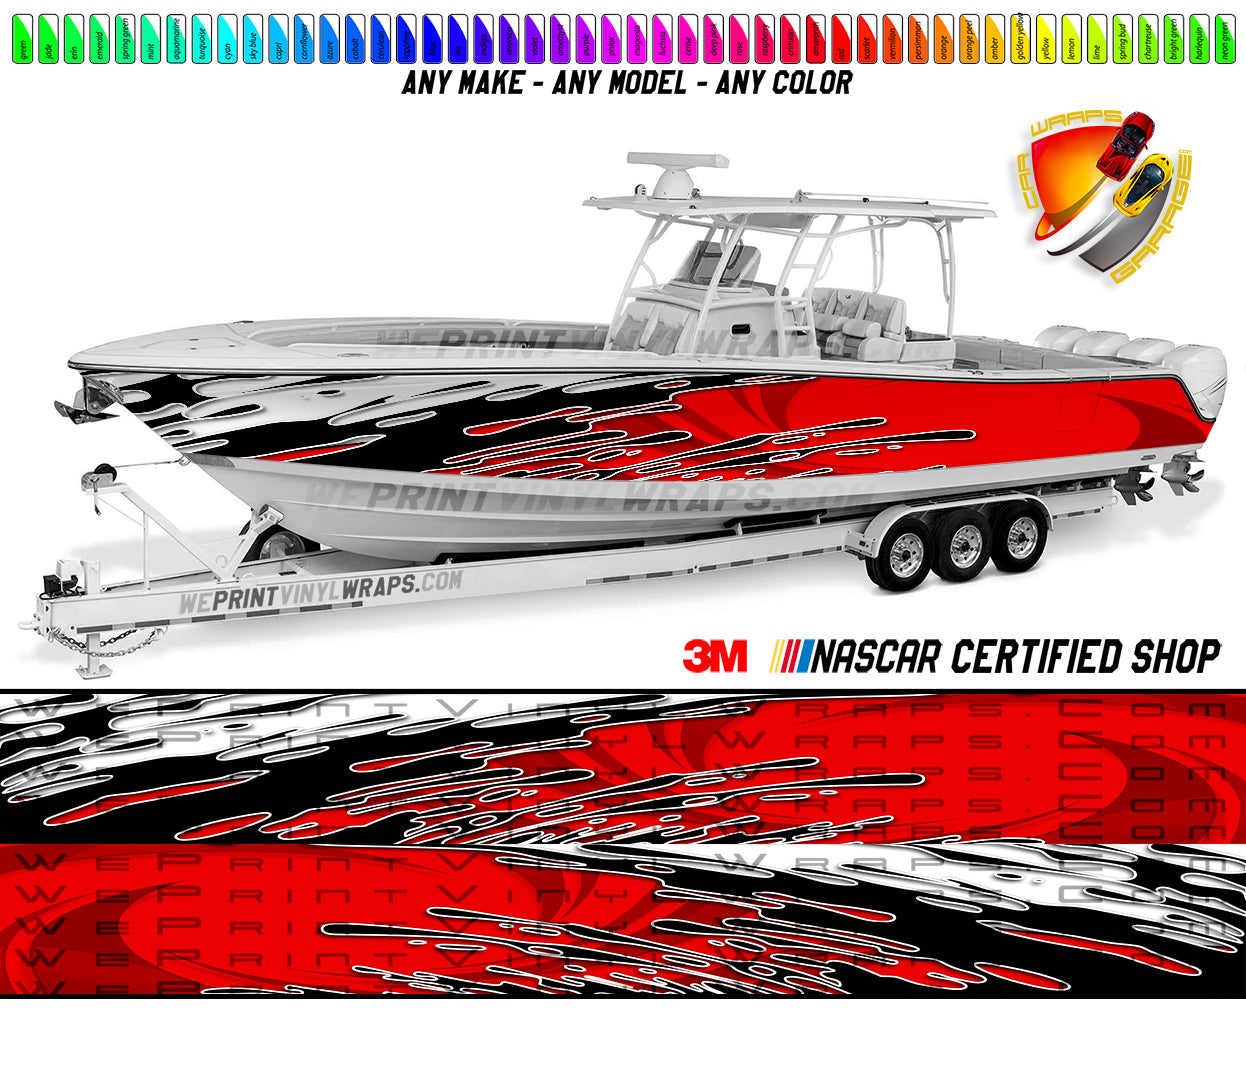 Red Black and White Splatter Graphic Vinyl Boat Wrap Decal Fishing Pontoon  Sportsman Console Bowriders Deck Boat Watercraft etc.. Boat Wrap Decal